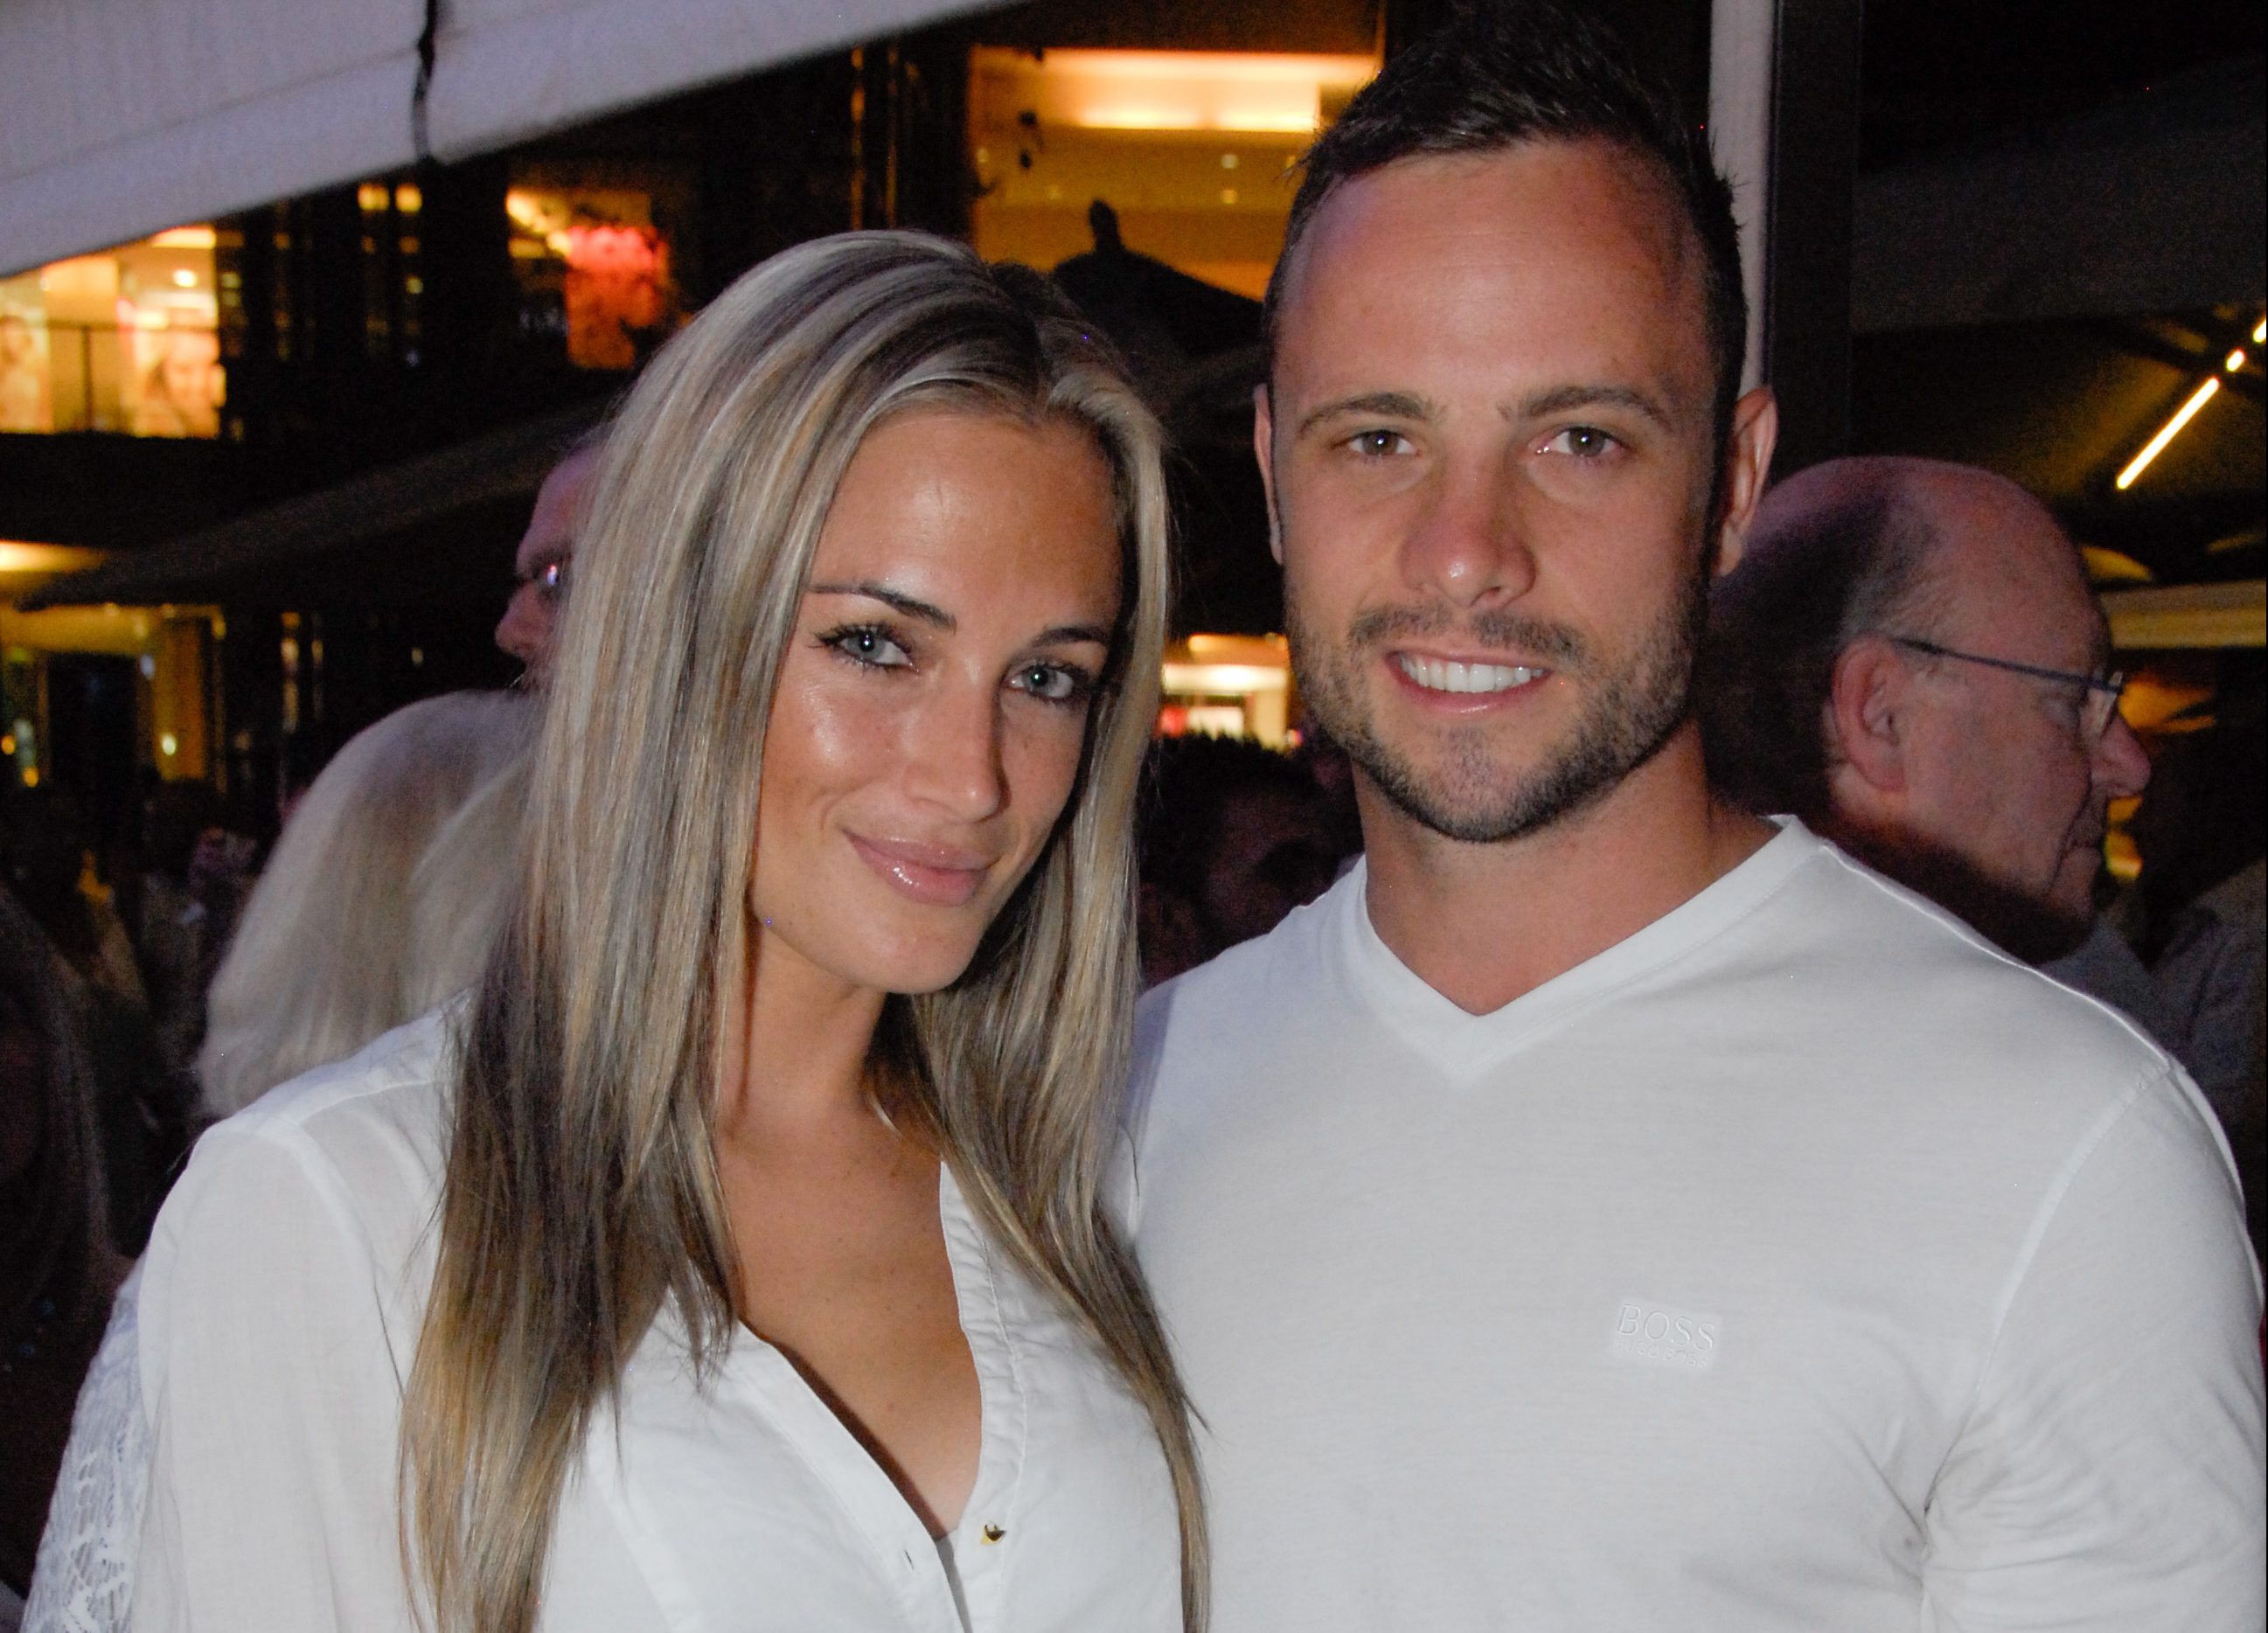 Reeva Steenkamp: 5 Fast Facts You Need to Know